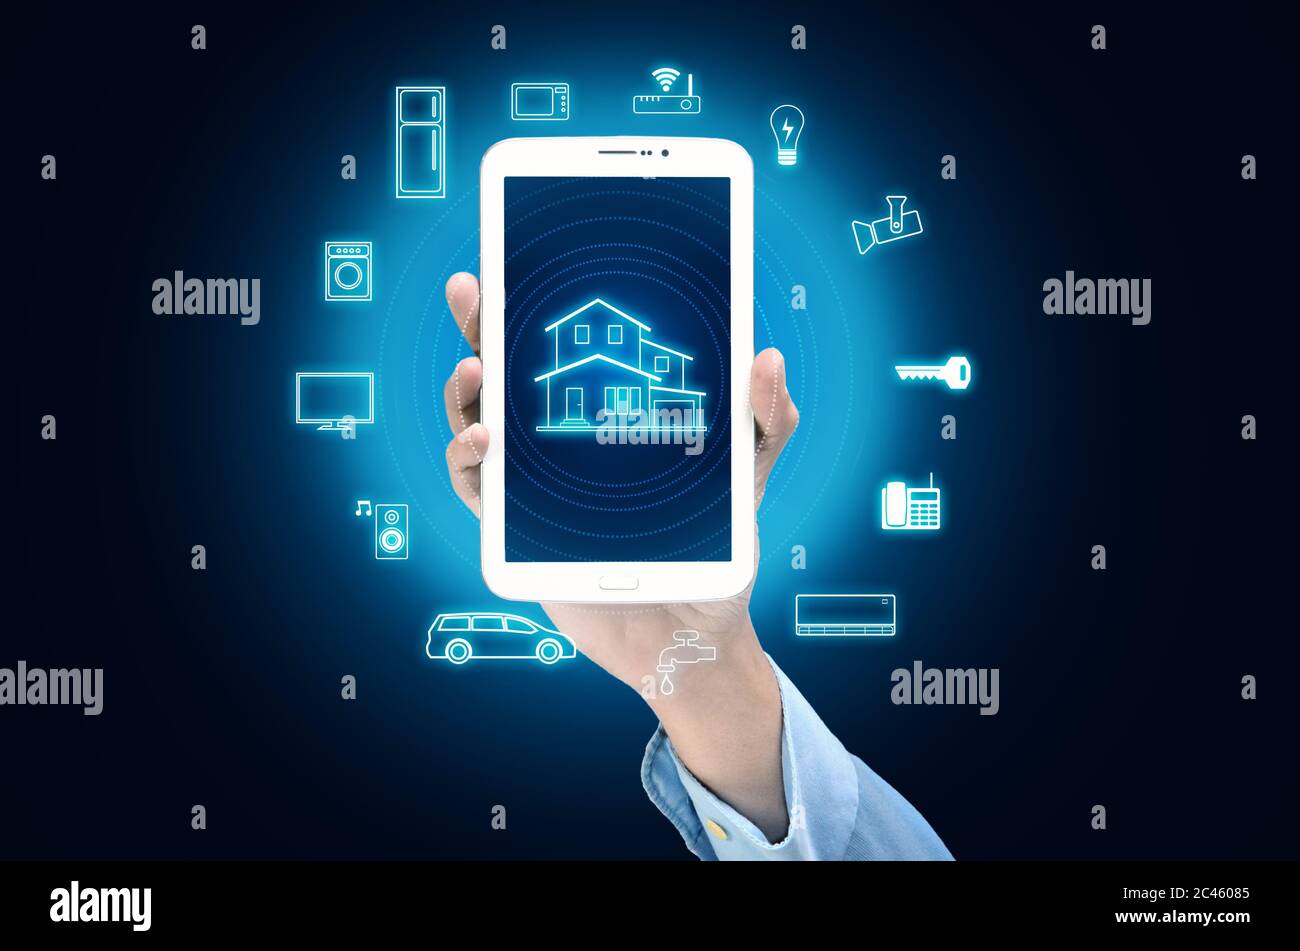 Internet of things and smart home concept Stock Photo